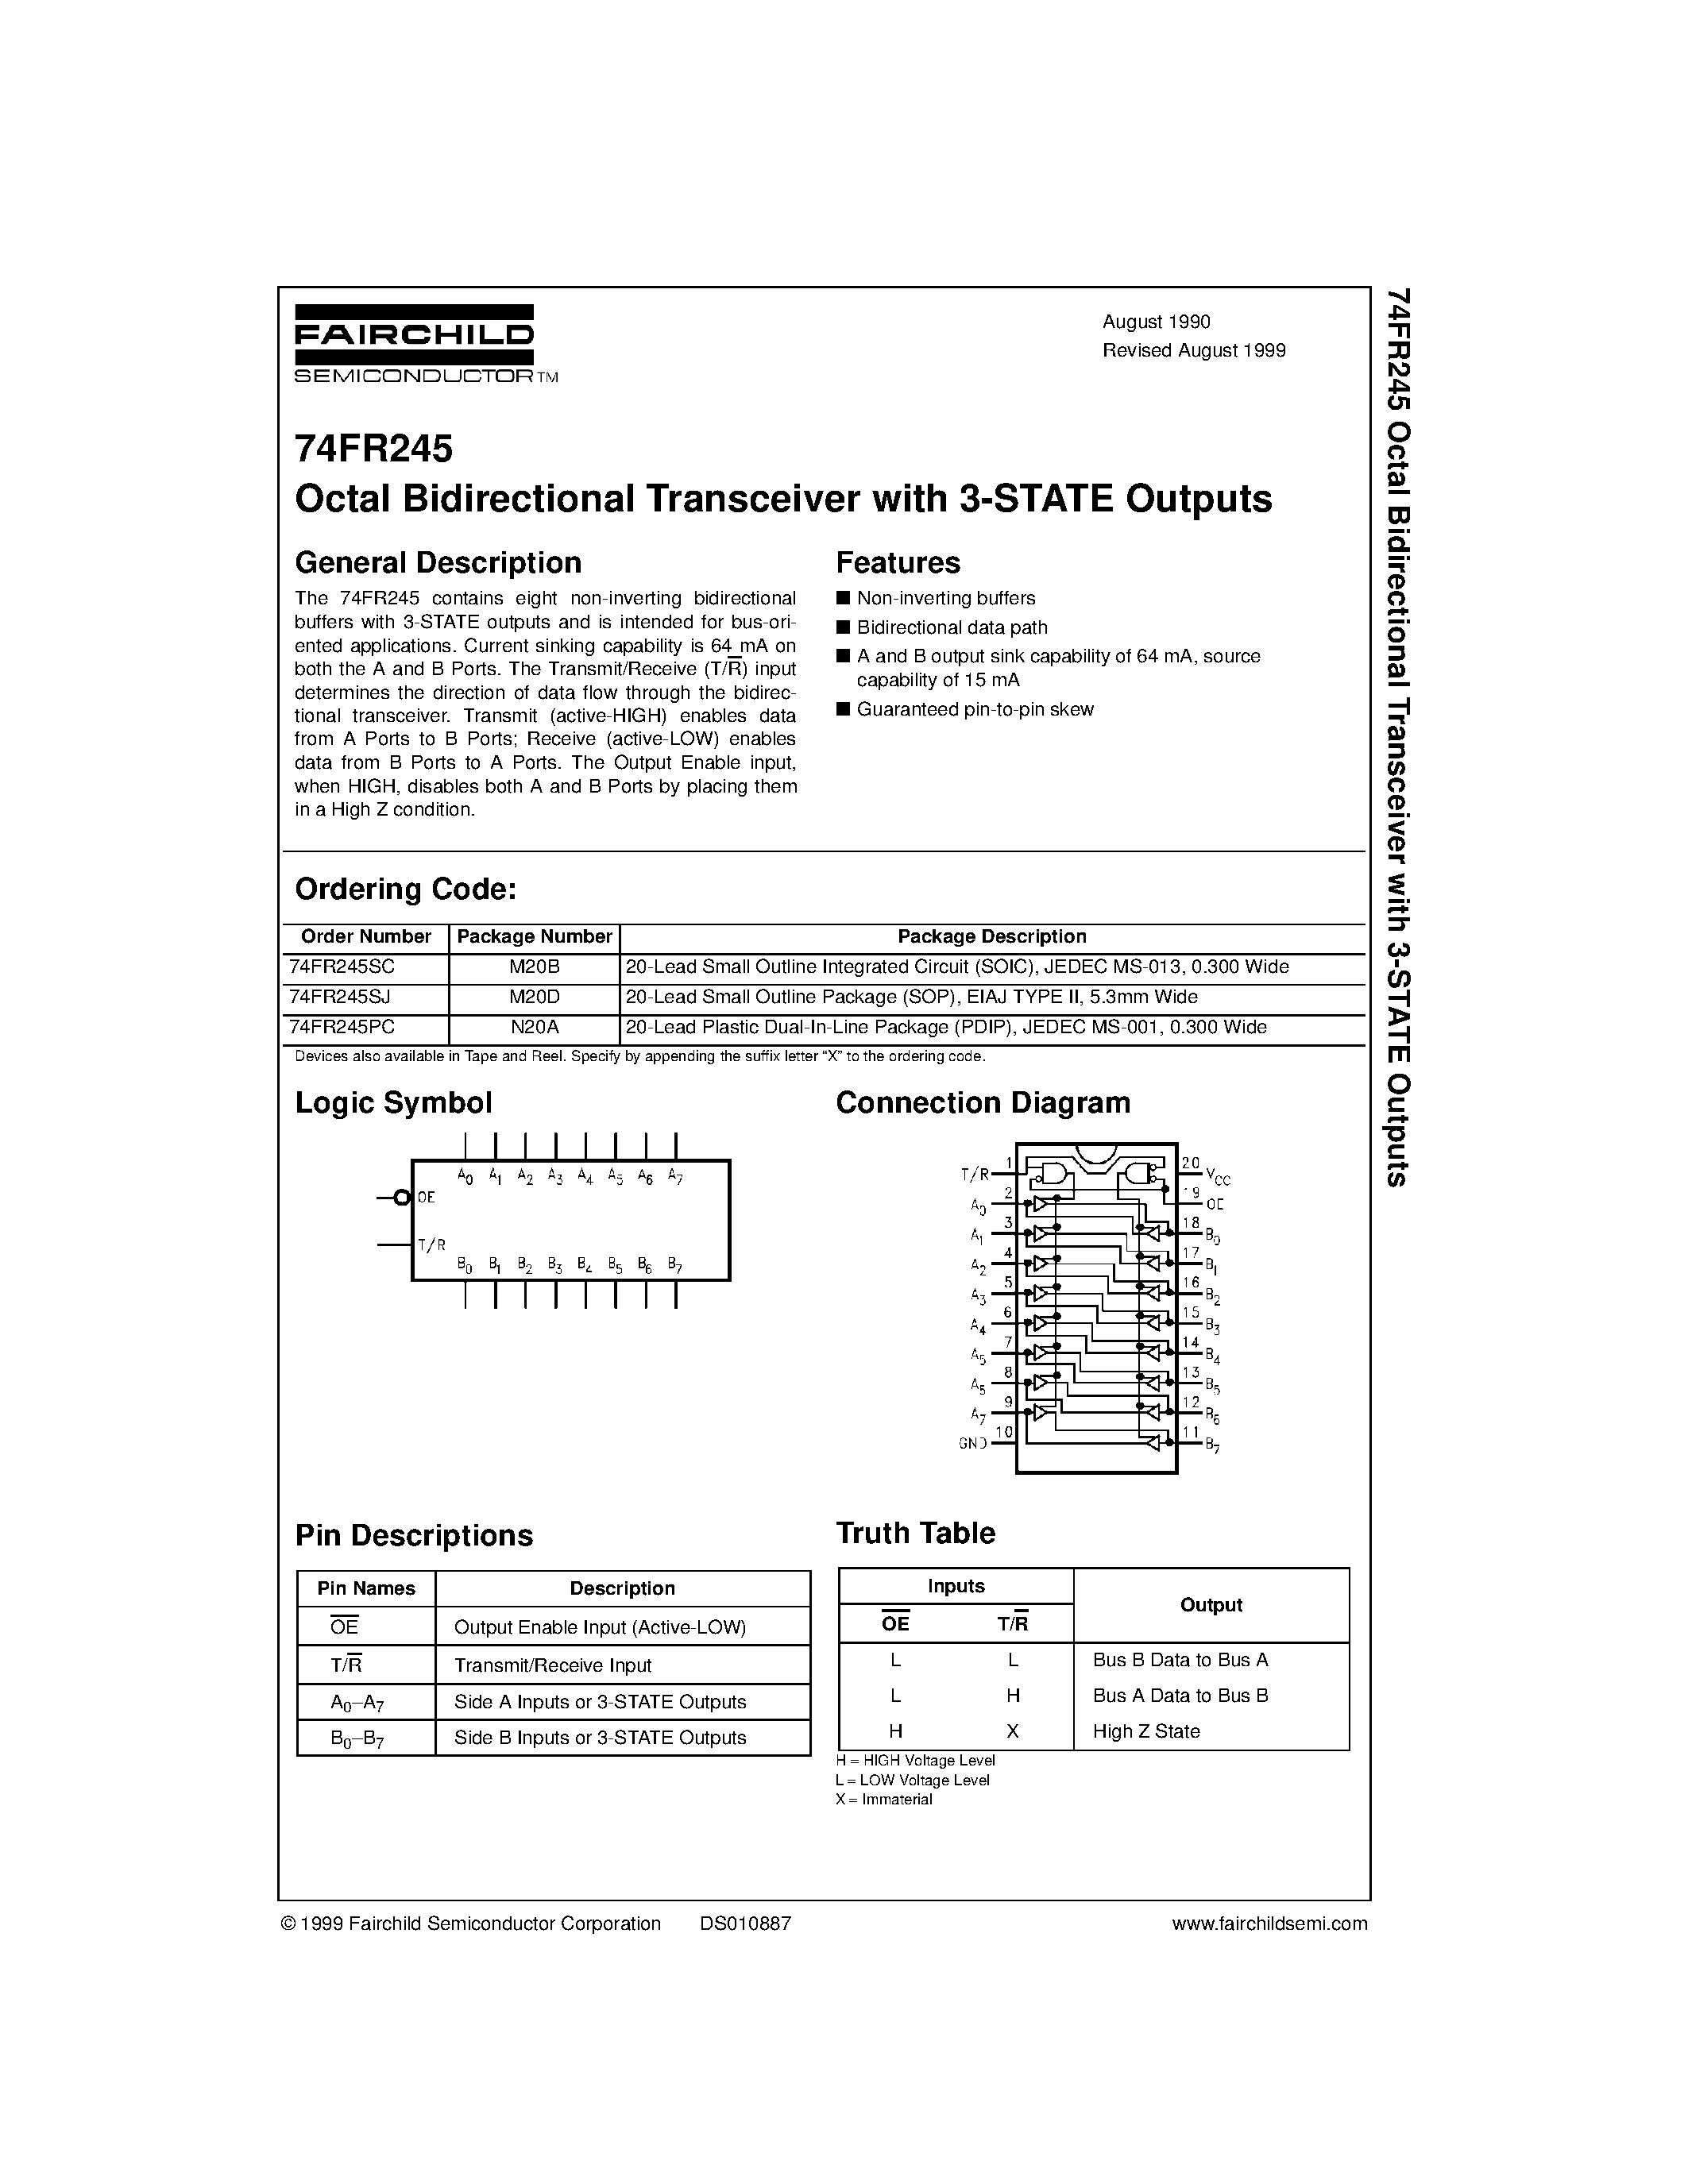 Datasheet 74FR245SJ - Octal Bidirectional Transceiver with 3-STATE Outputs page 1